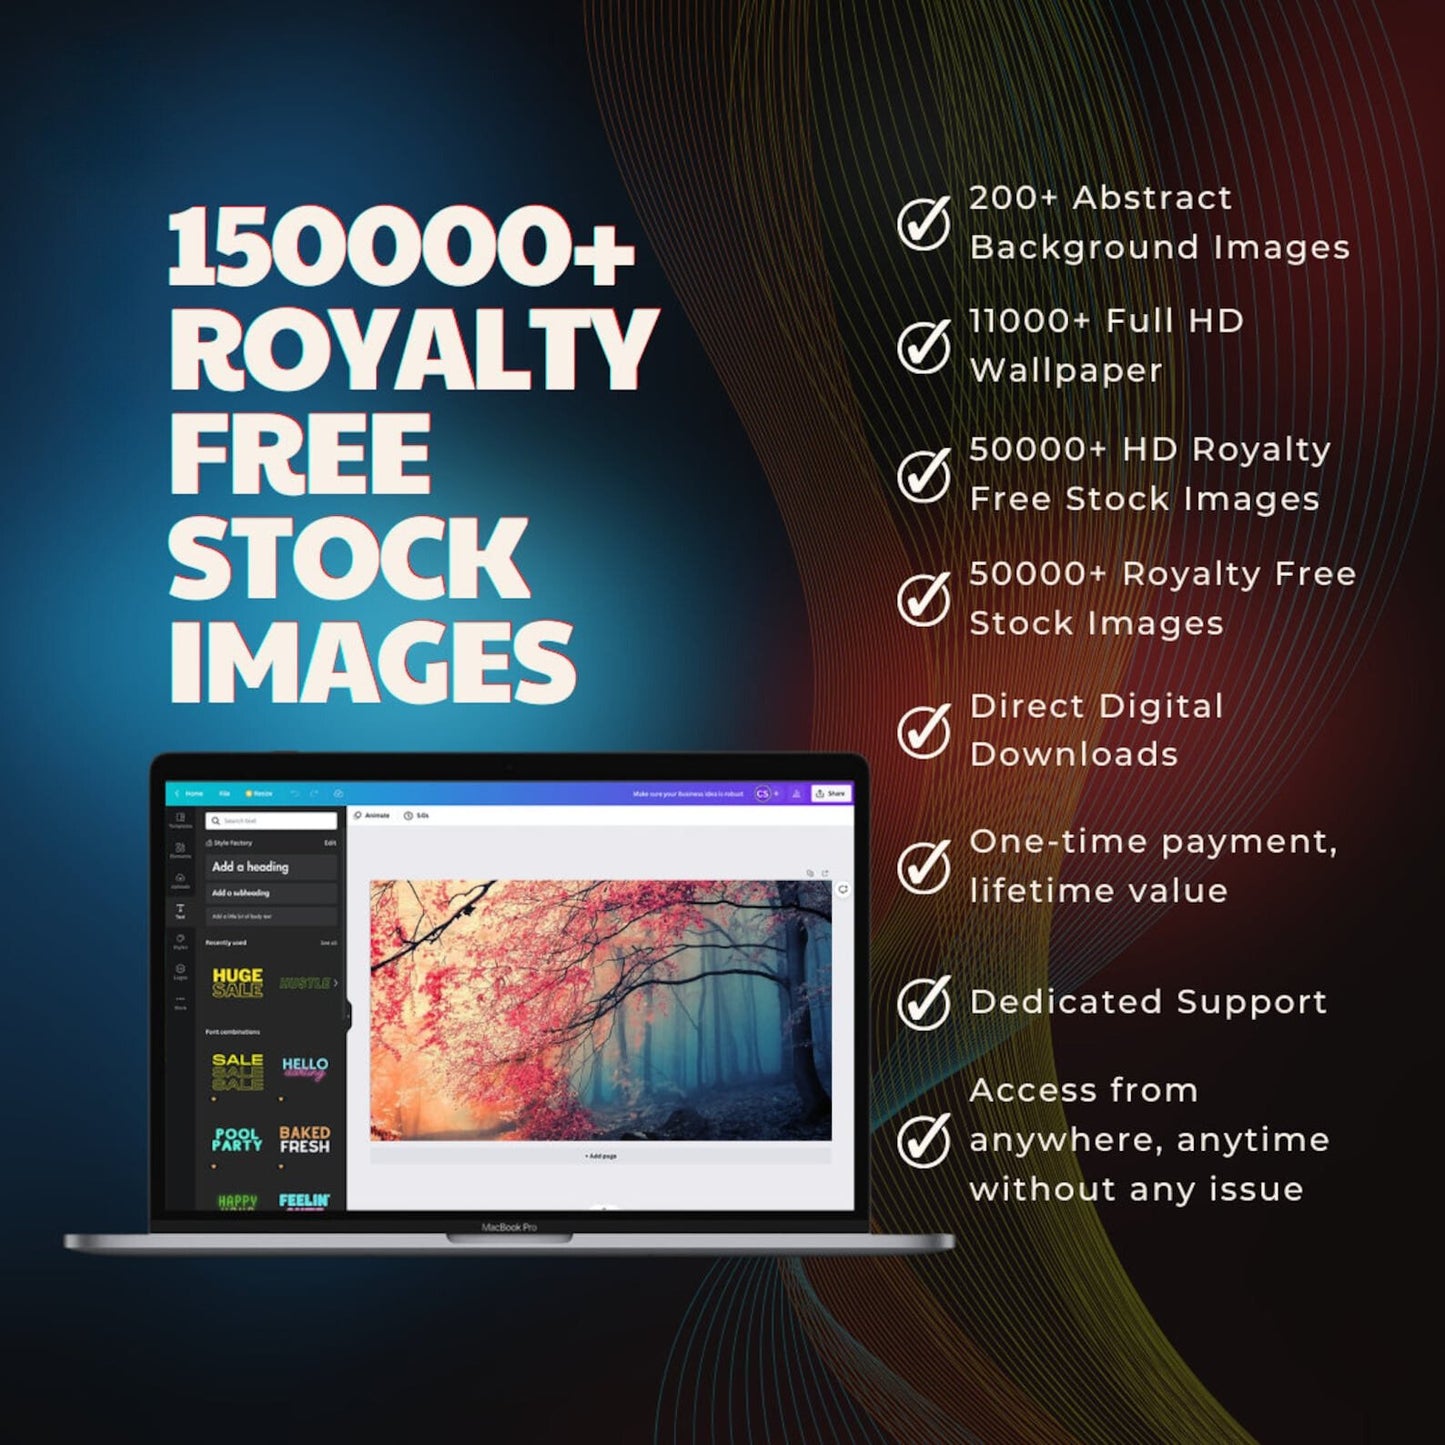 150,000+ Royalty free stock images - AscendPLR